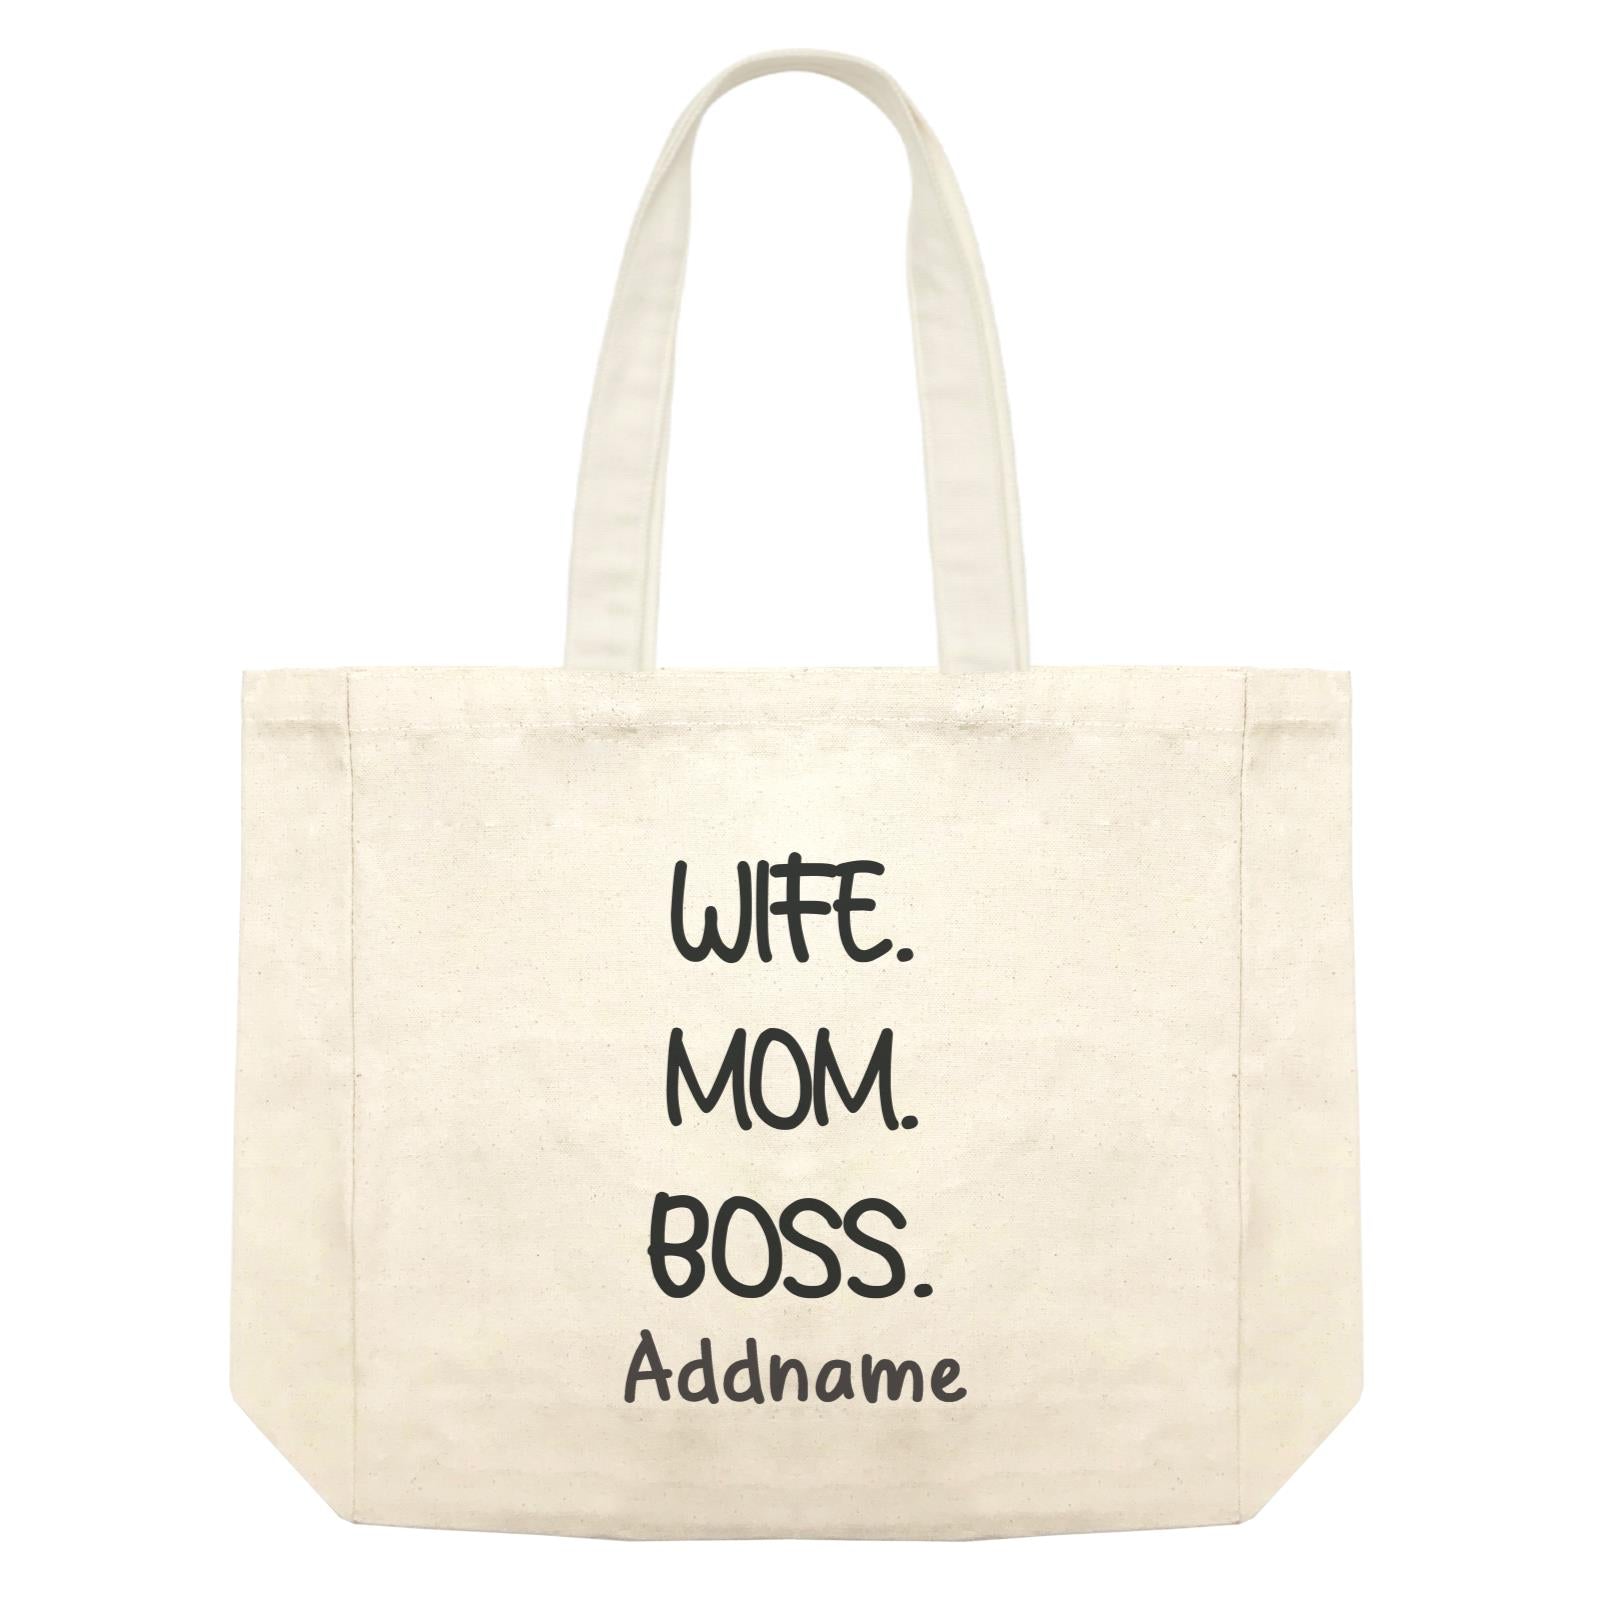 Girl Boss Quotes Cute Typefont Wife Mom Boss Addname Shopping Bag